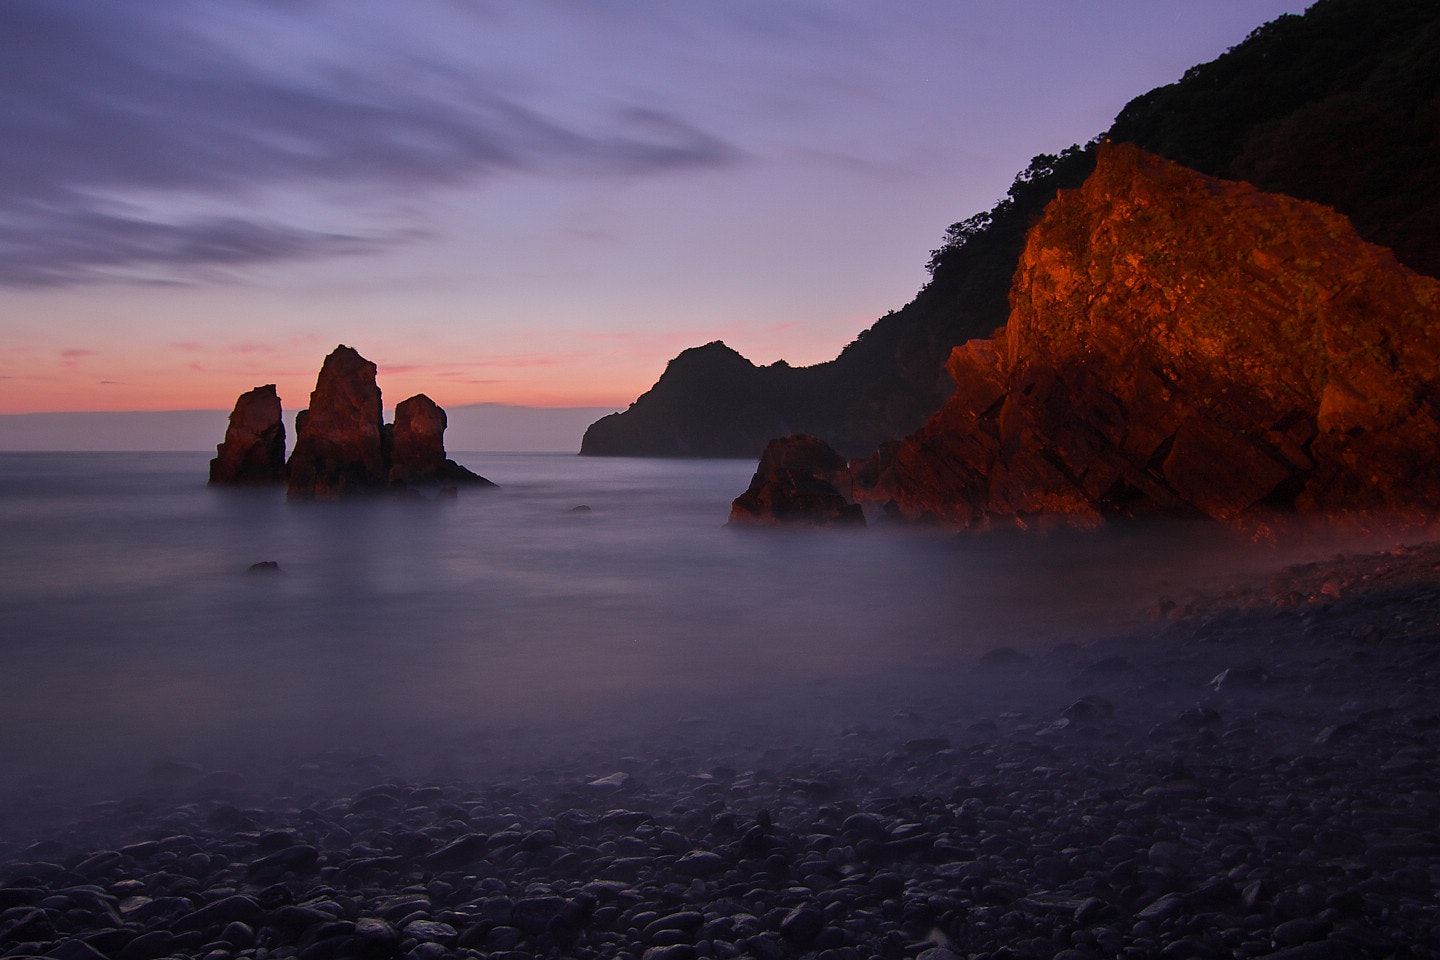 Tall Rock Formation Submerged in Water Near the Shore during Golden Hour, Beach, Dawn, Dusk, Landscape, HQ Photo